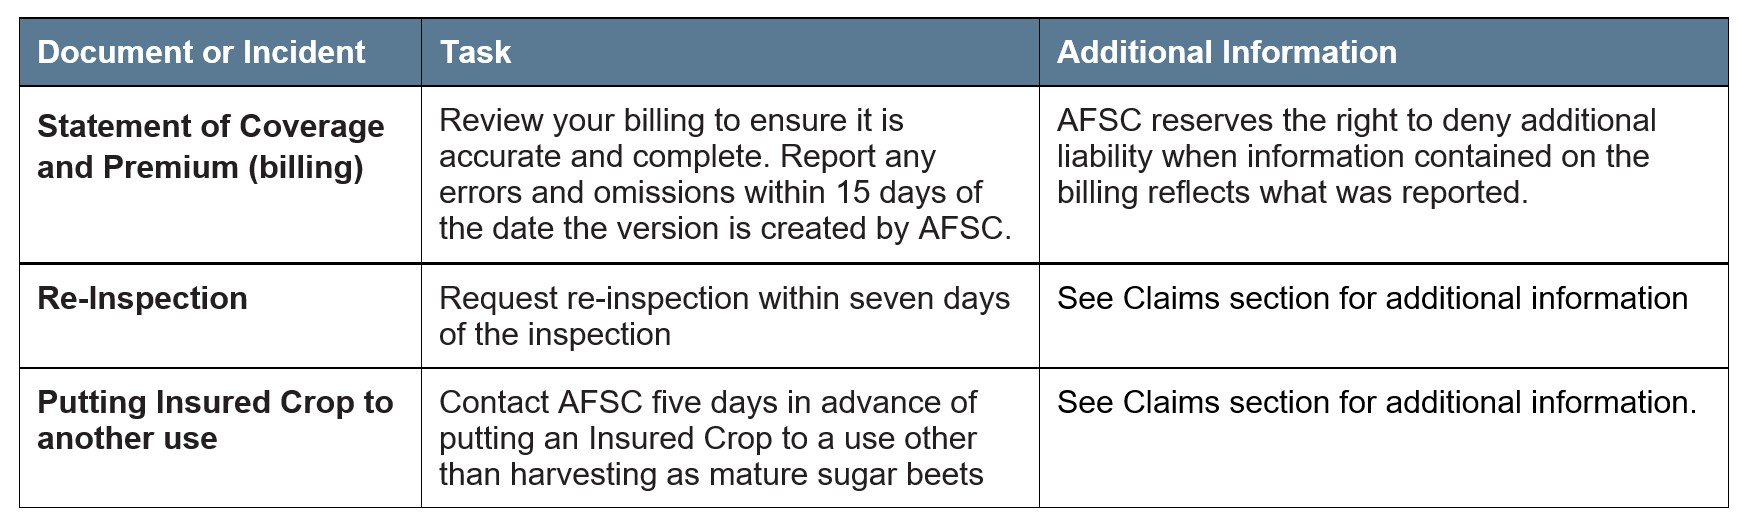 Sugar Beets Article 4 Other Deadlines Call AFSC for details